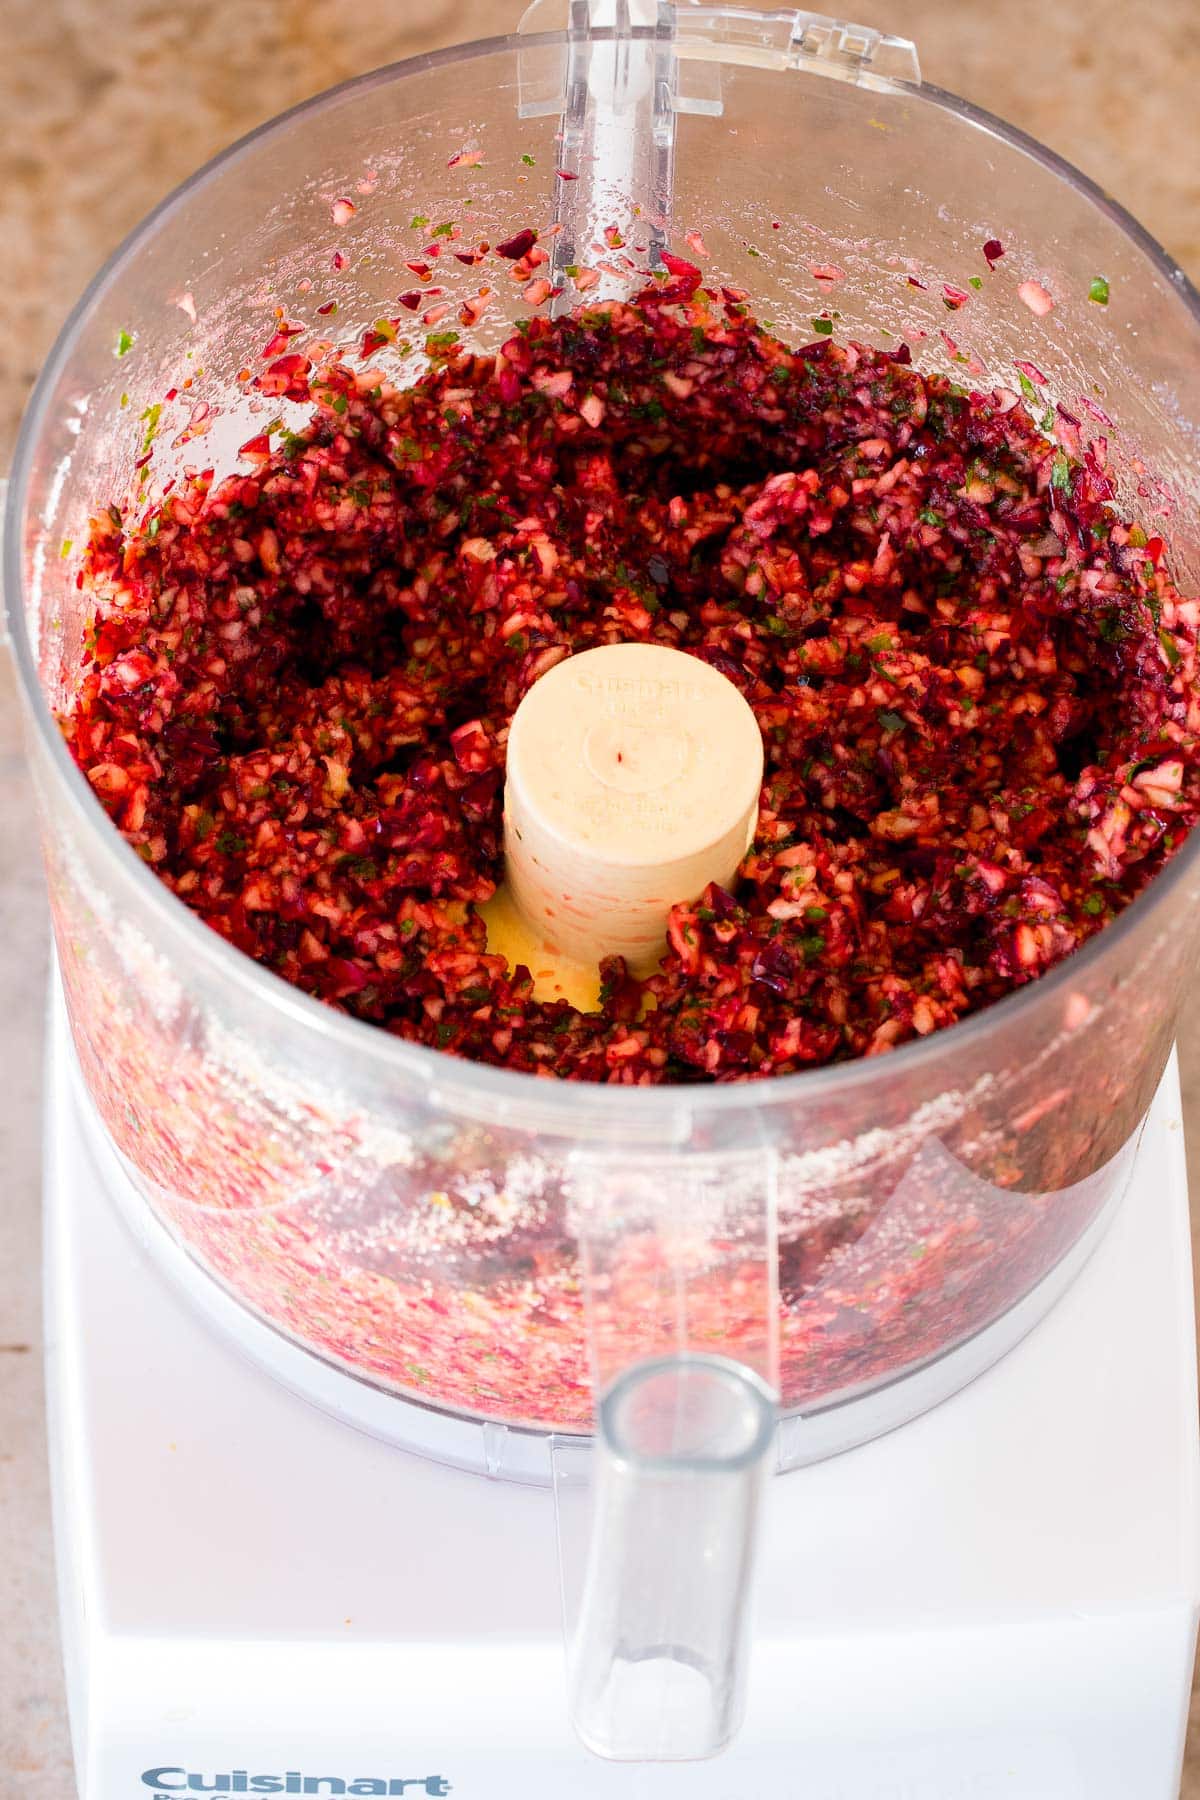 Cranberries, herbs and sugar ground up in a food processor.